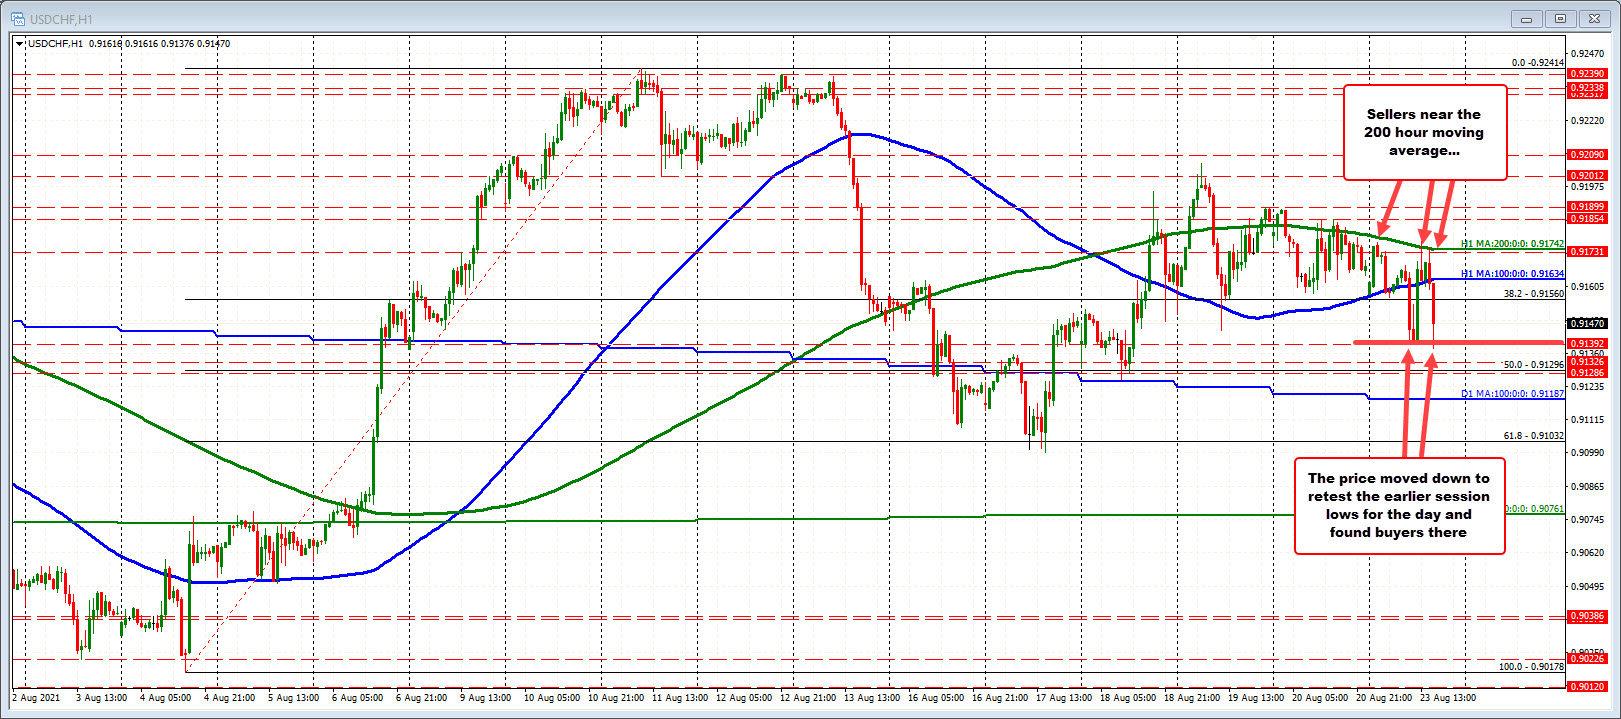 USDCHF on the hourly chart